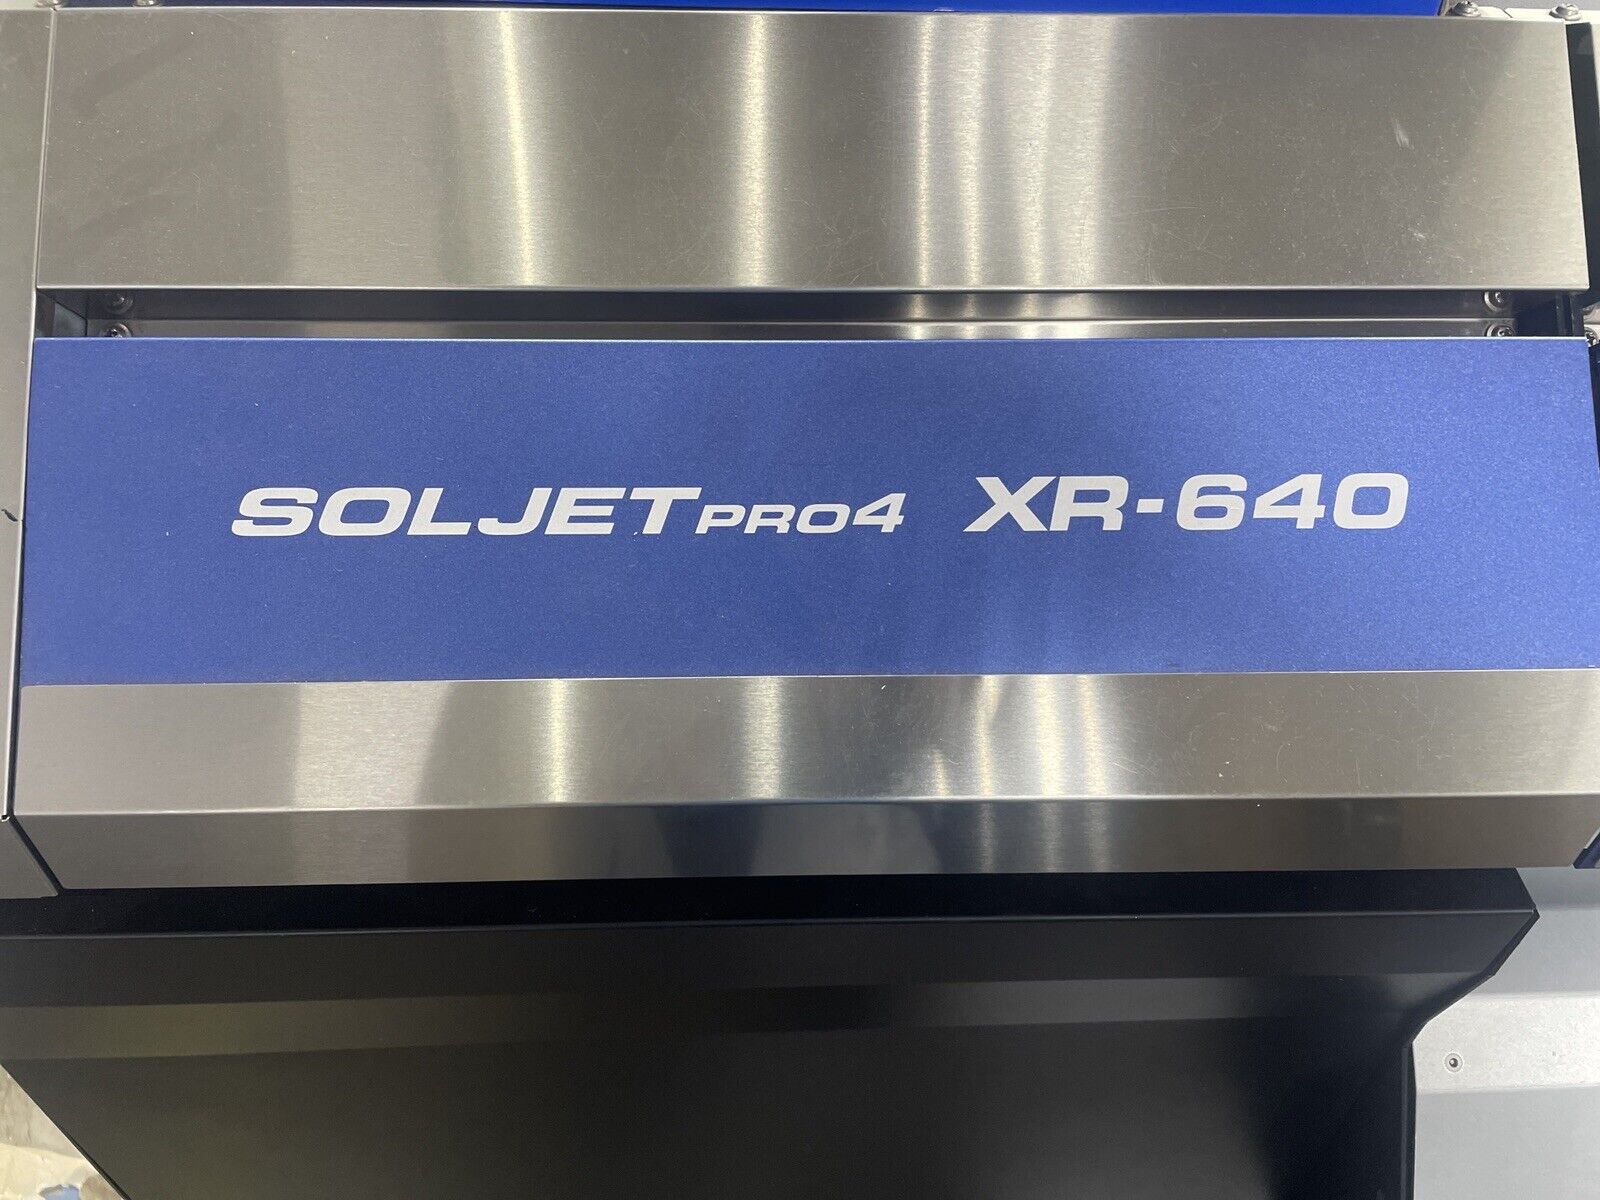 Roland SolJet Pro4 XR-640 Used Great Condition All Jets Firing Perfect